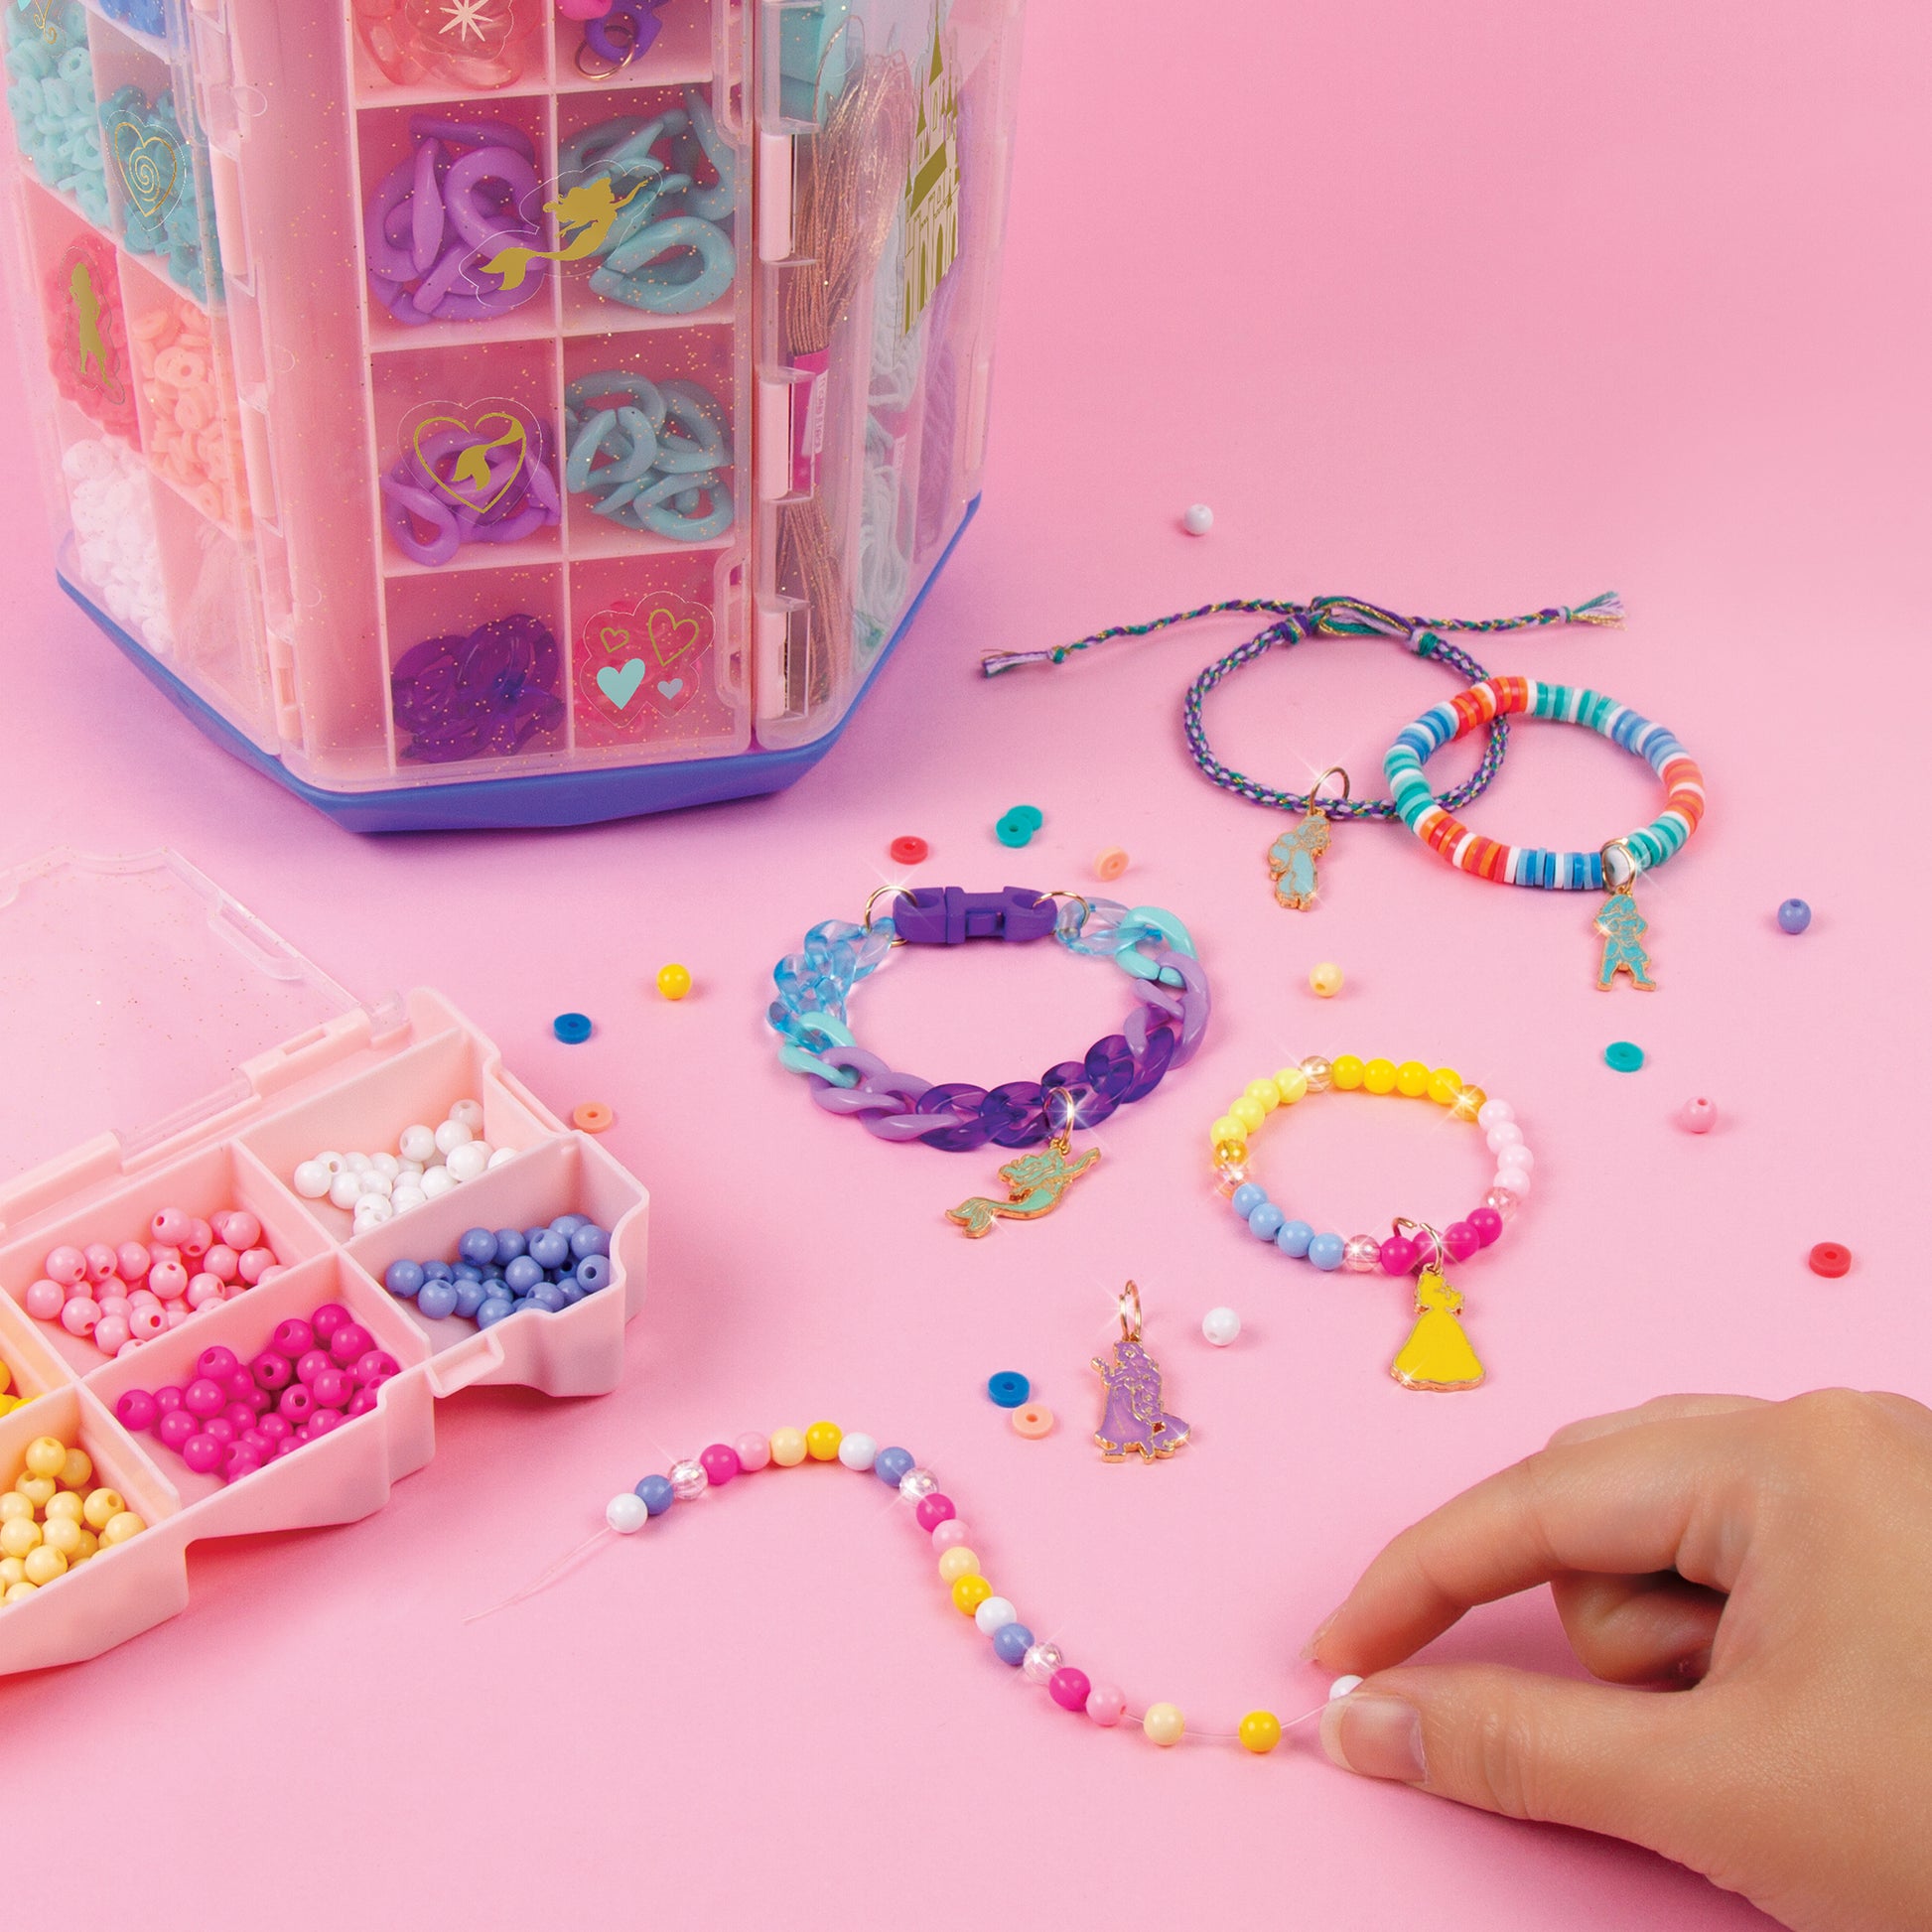 Make It Real: 5-in-1 DIY Jewelry Kit & Activity Tower, 1600 Pieces